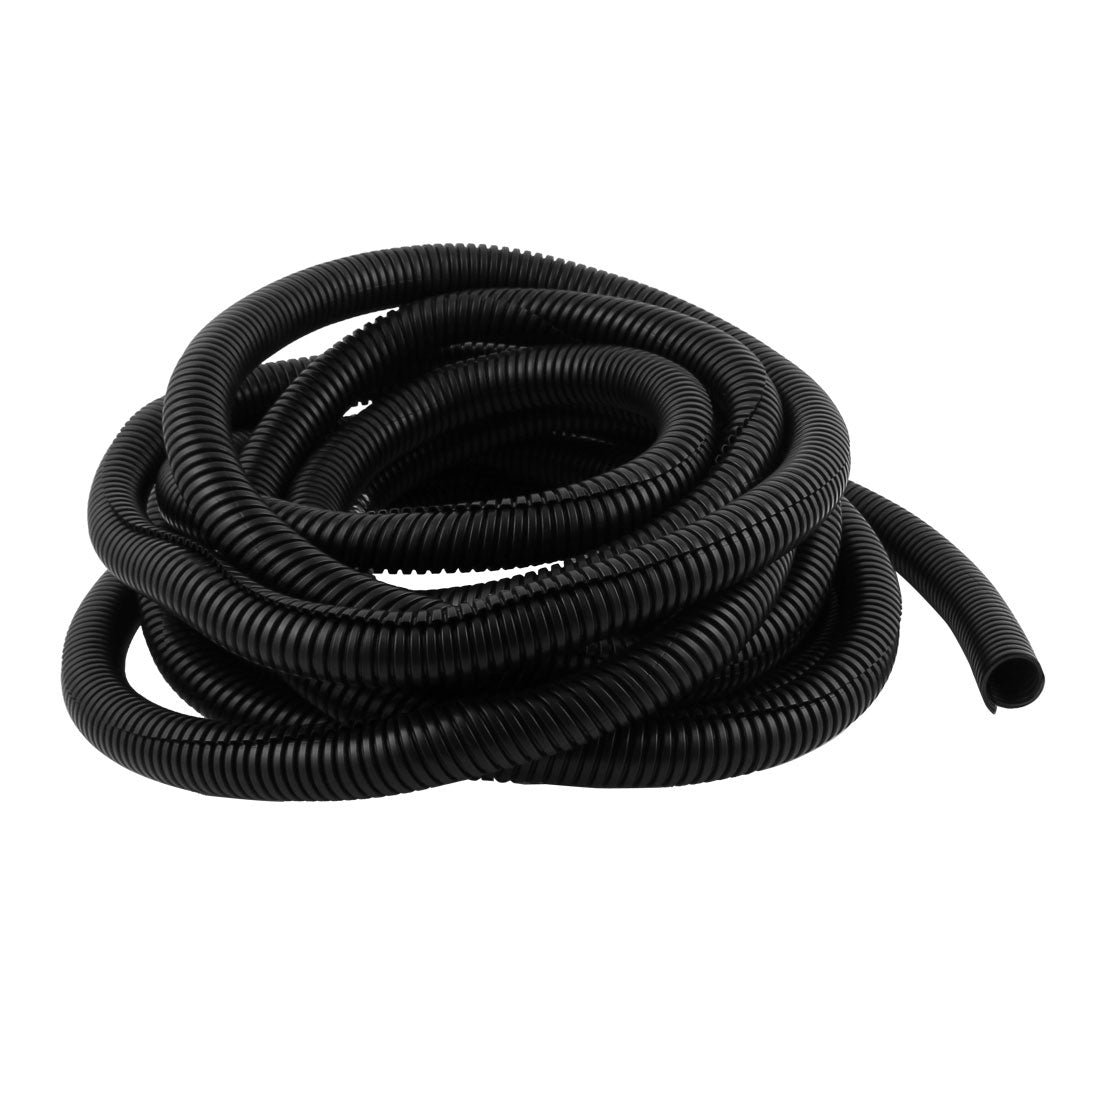 uxcell Uxcell 9.5 M 25 x 28 mm PVC Split Corrugated Conduit Tube for Garden,Office Black